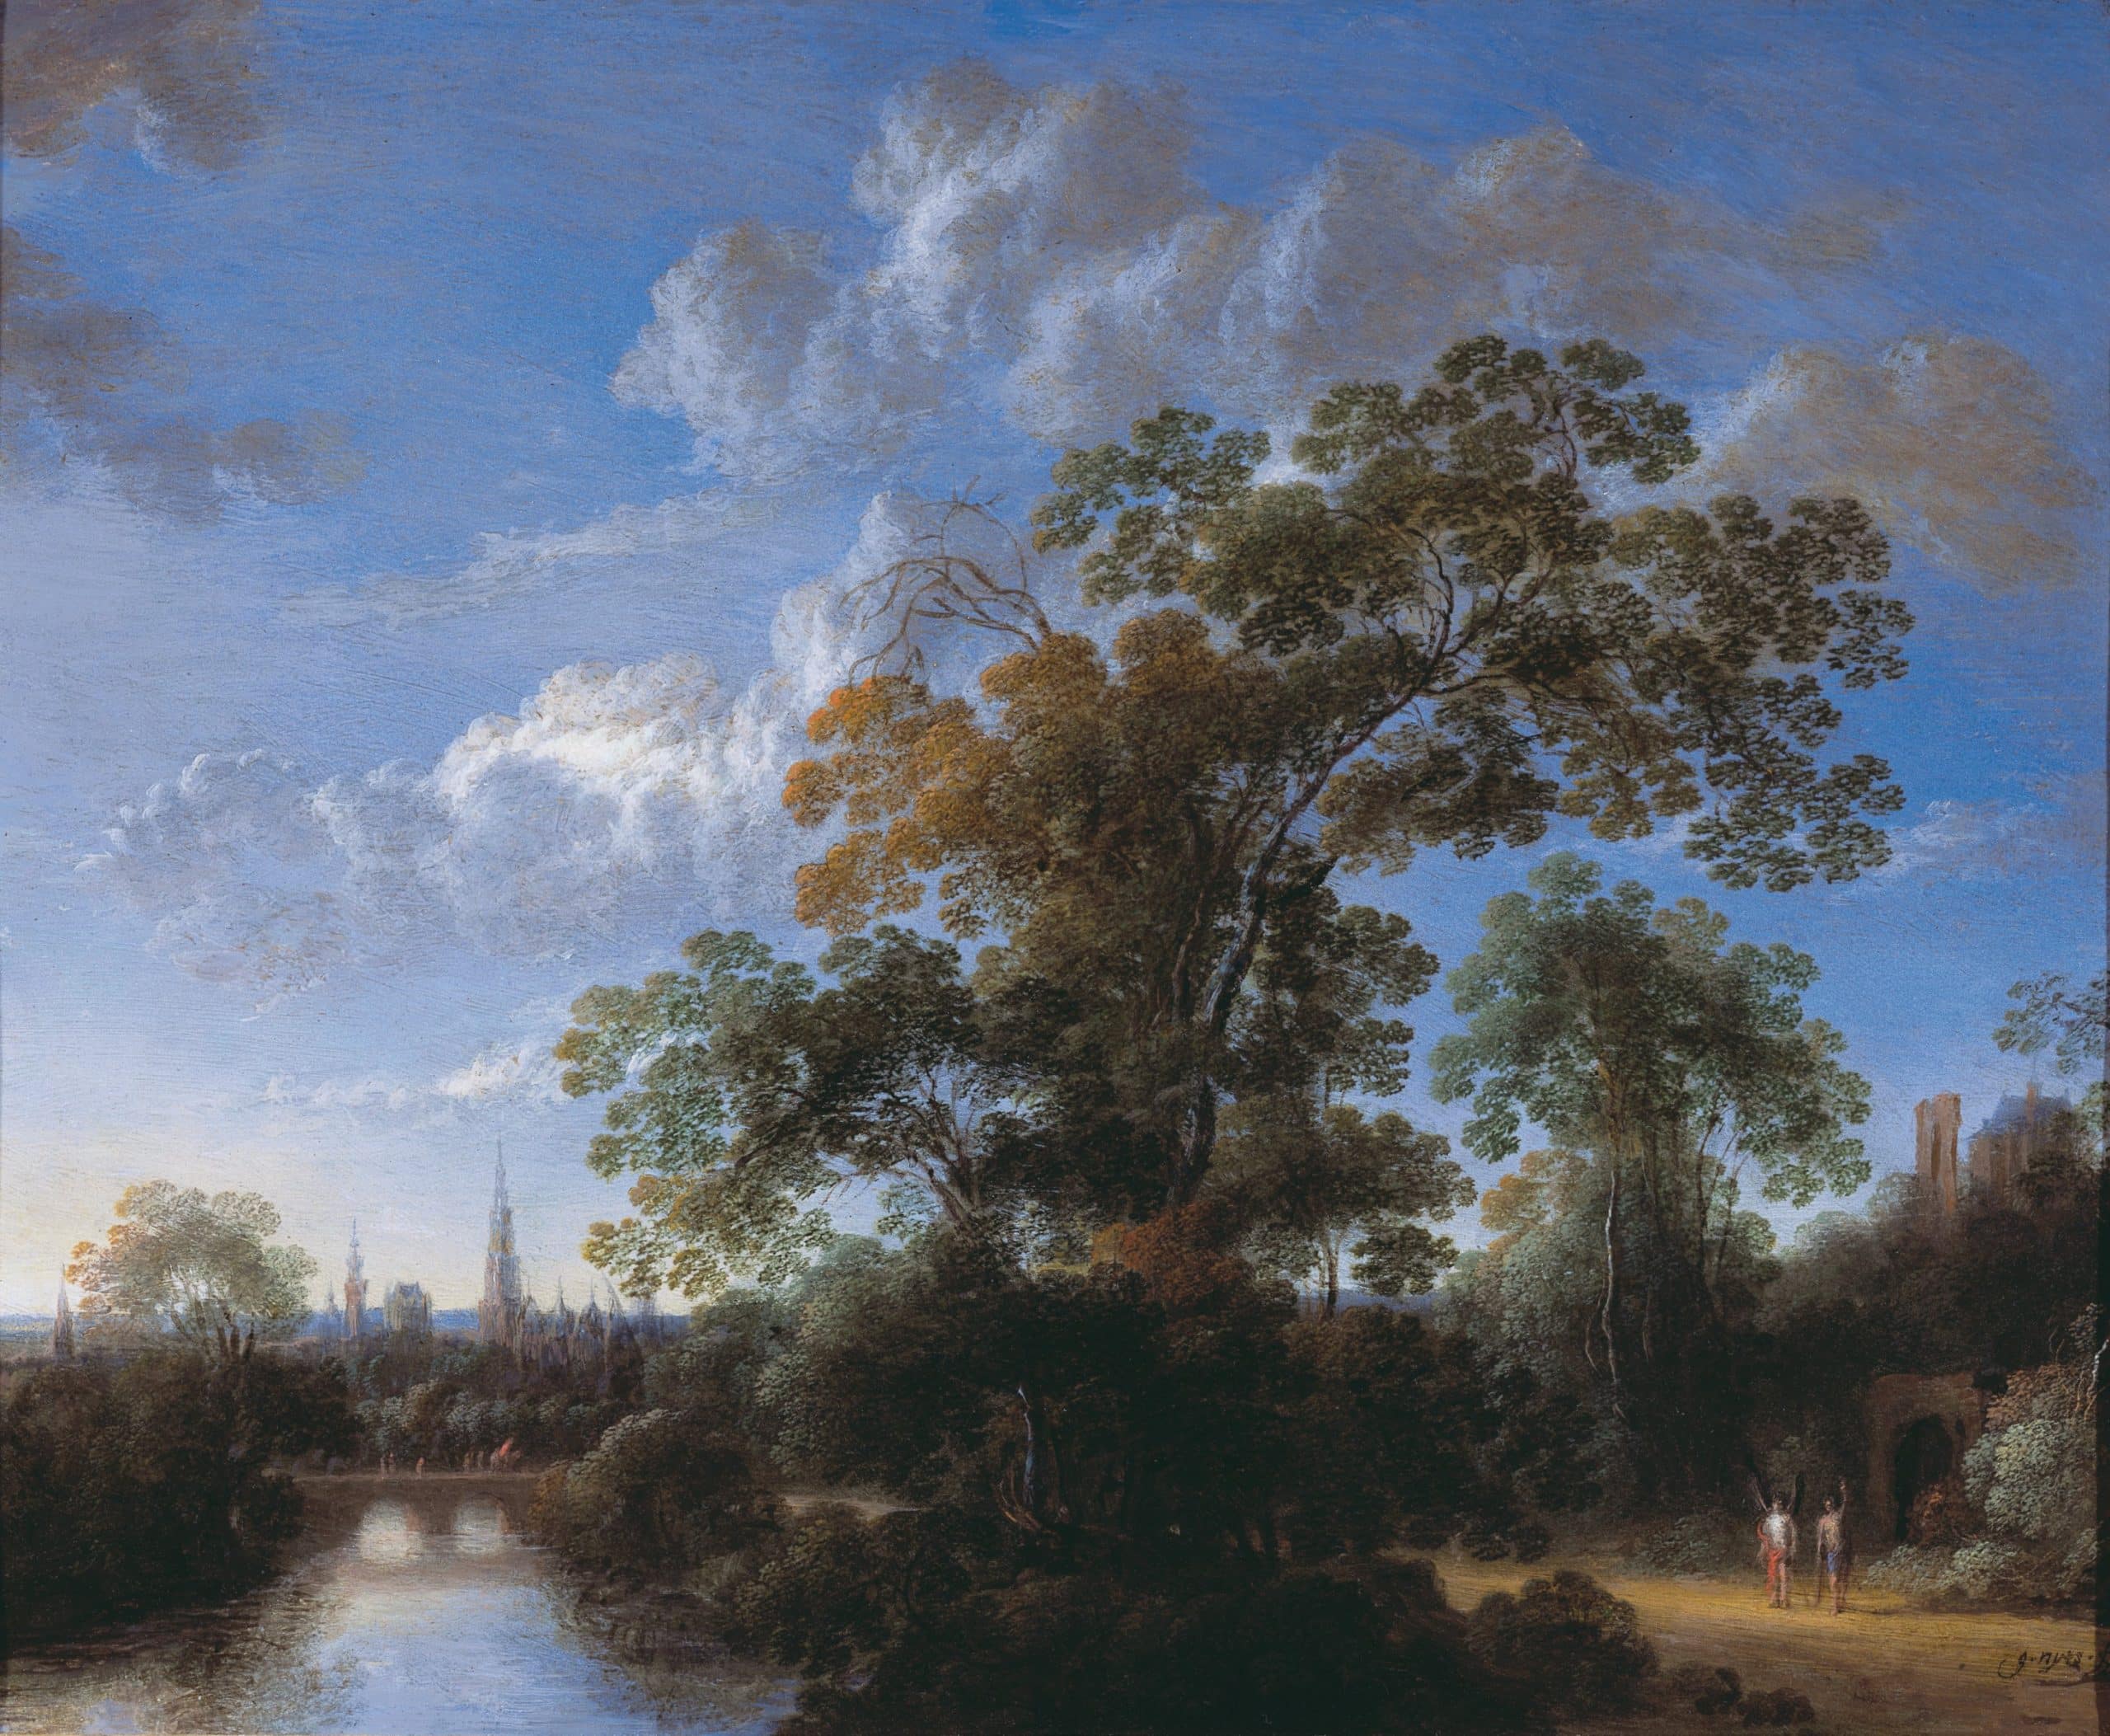 Gillis Neyts, Landscape with Tobias and the Angel, with a View of Antwerp in the Background, 1660s, oil on copper. Gift of Alfred and Isabel Bader, 2012.